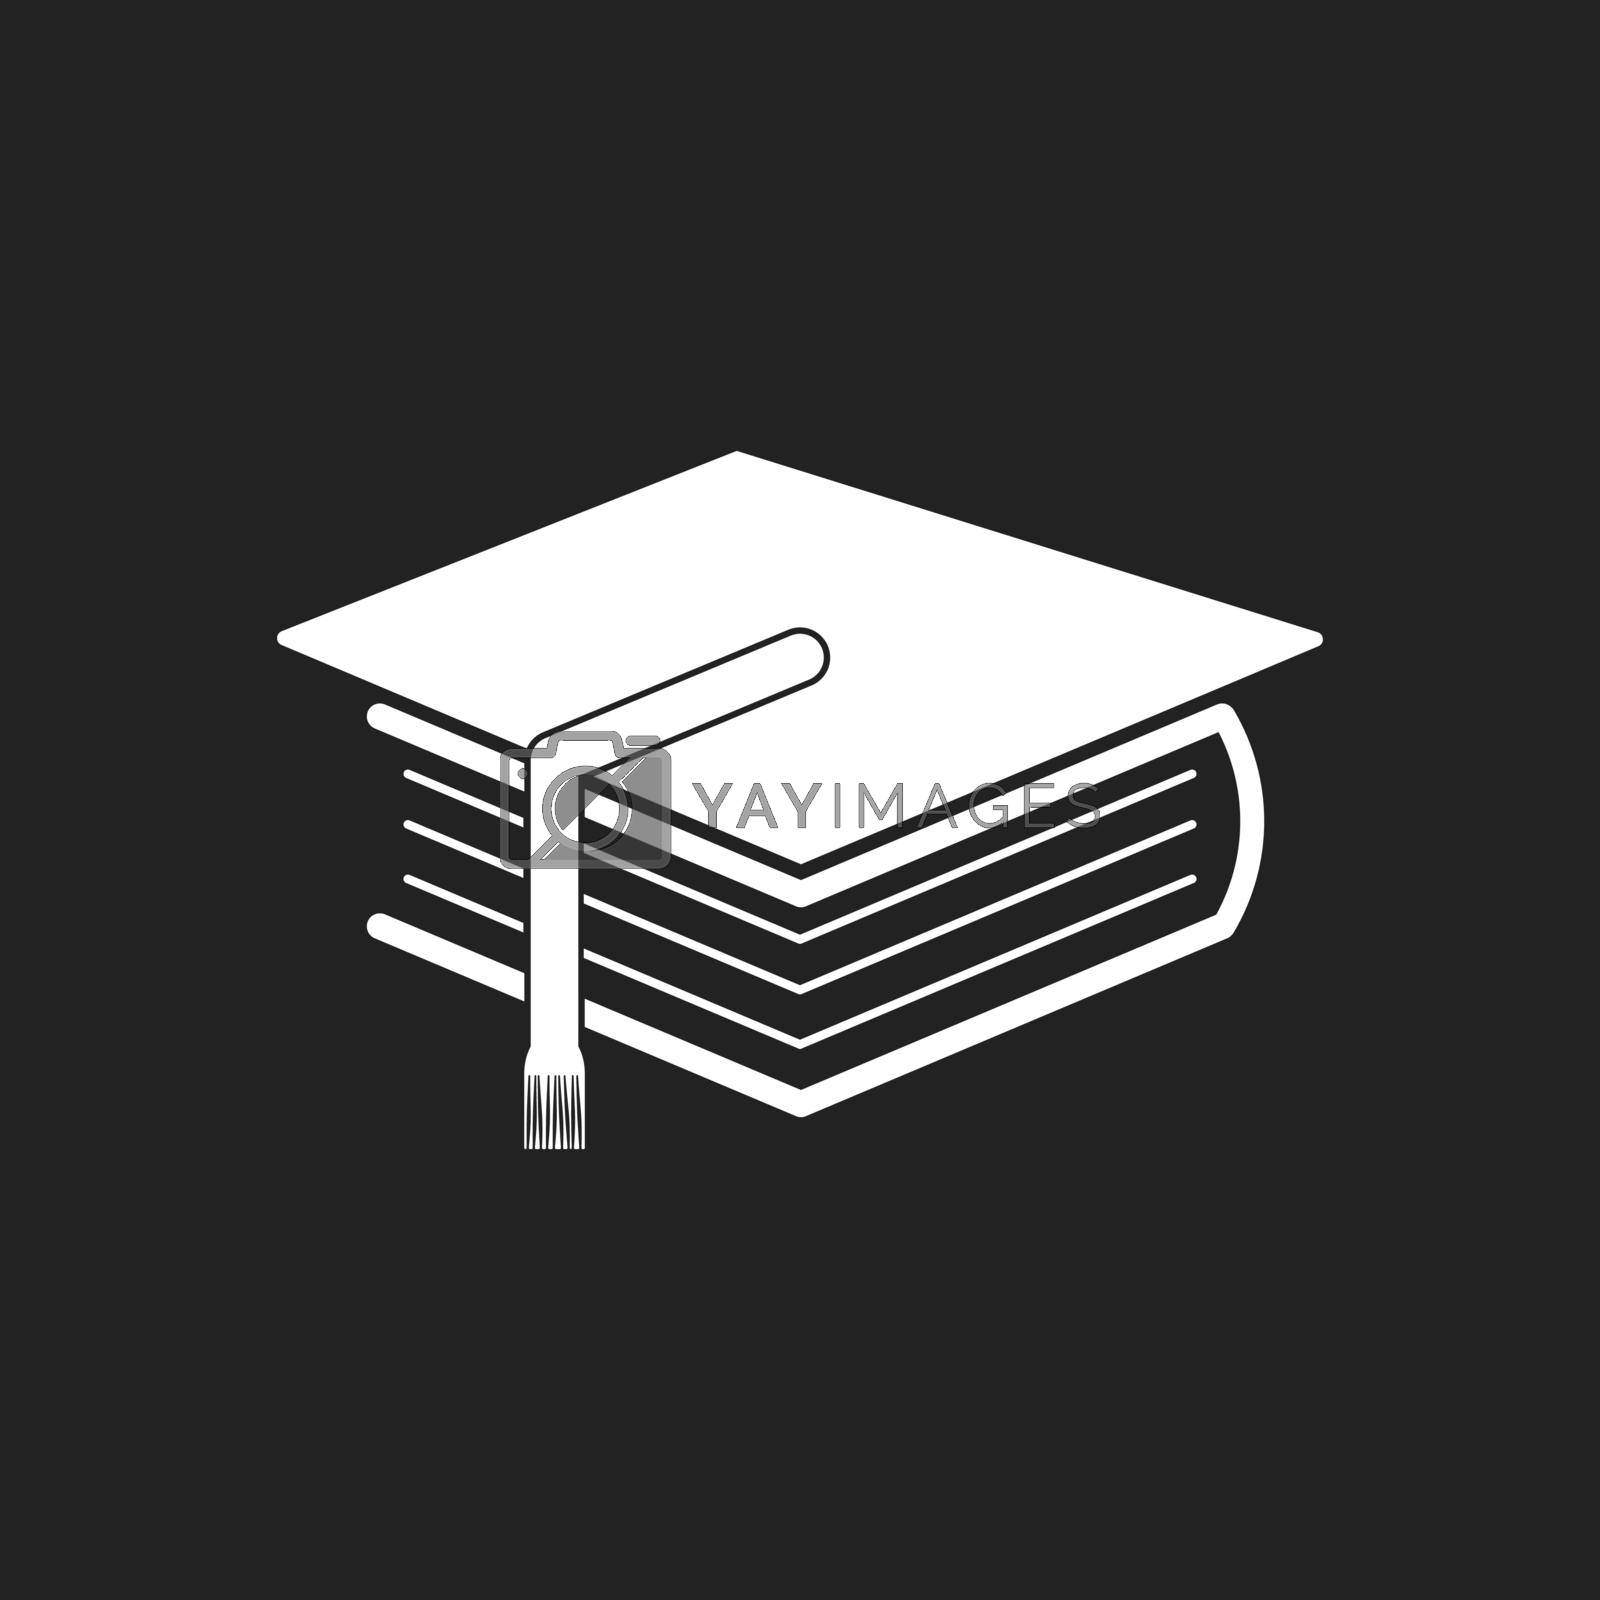 Education and book. Flat icon vector illustration on black background.